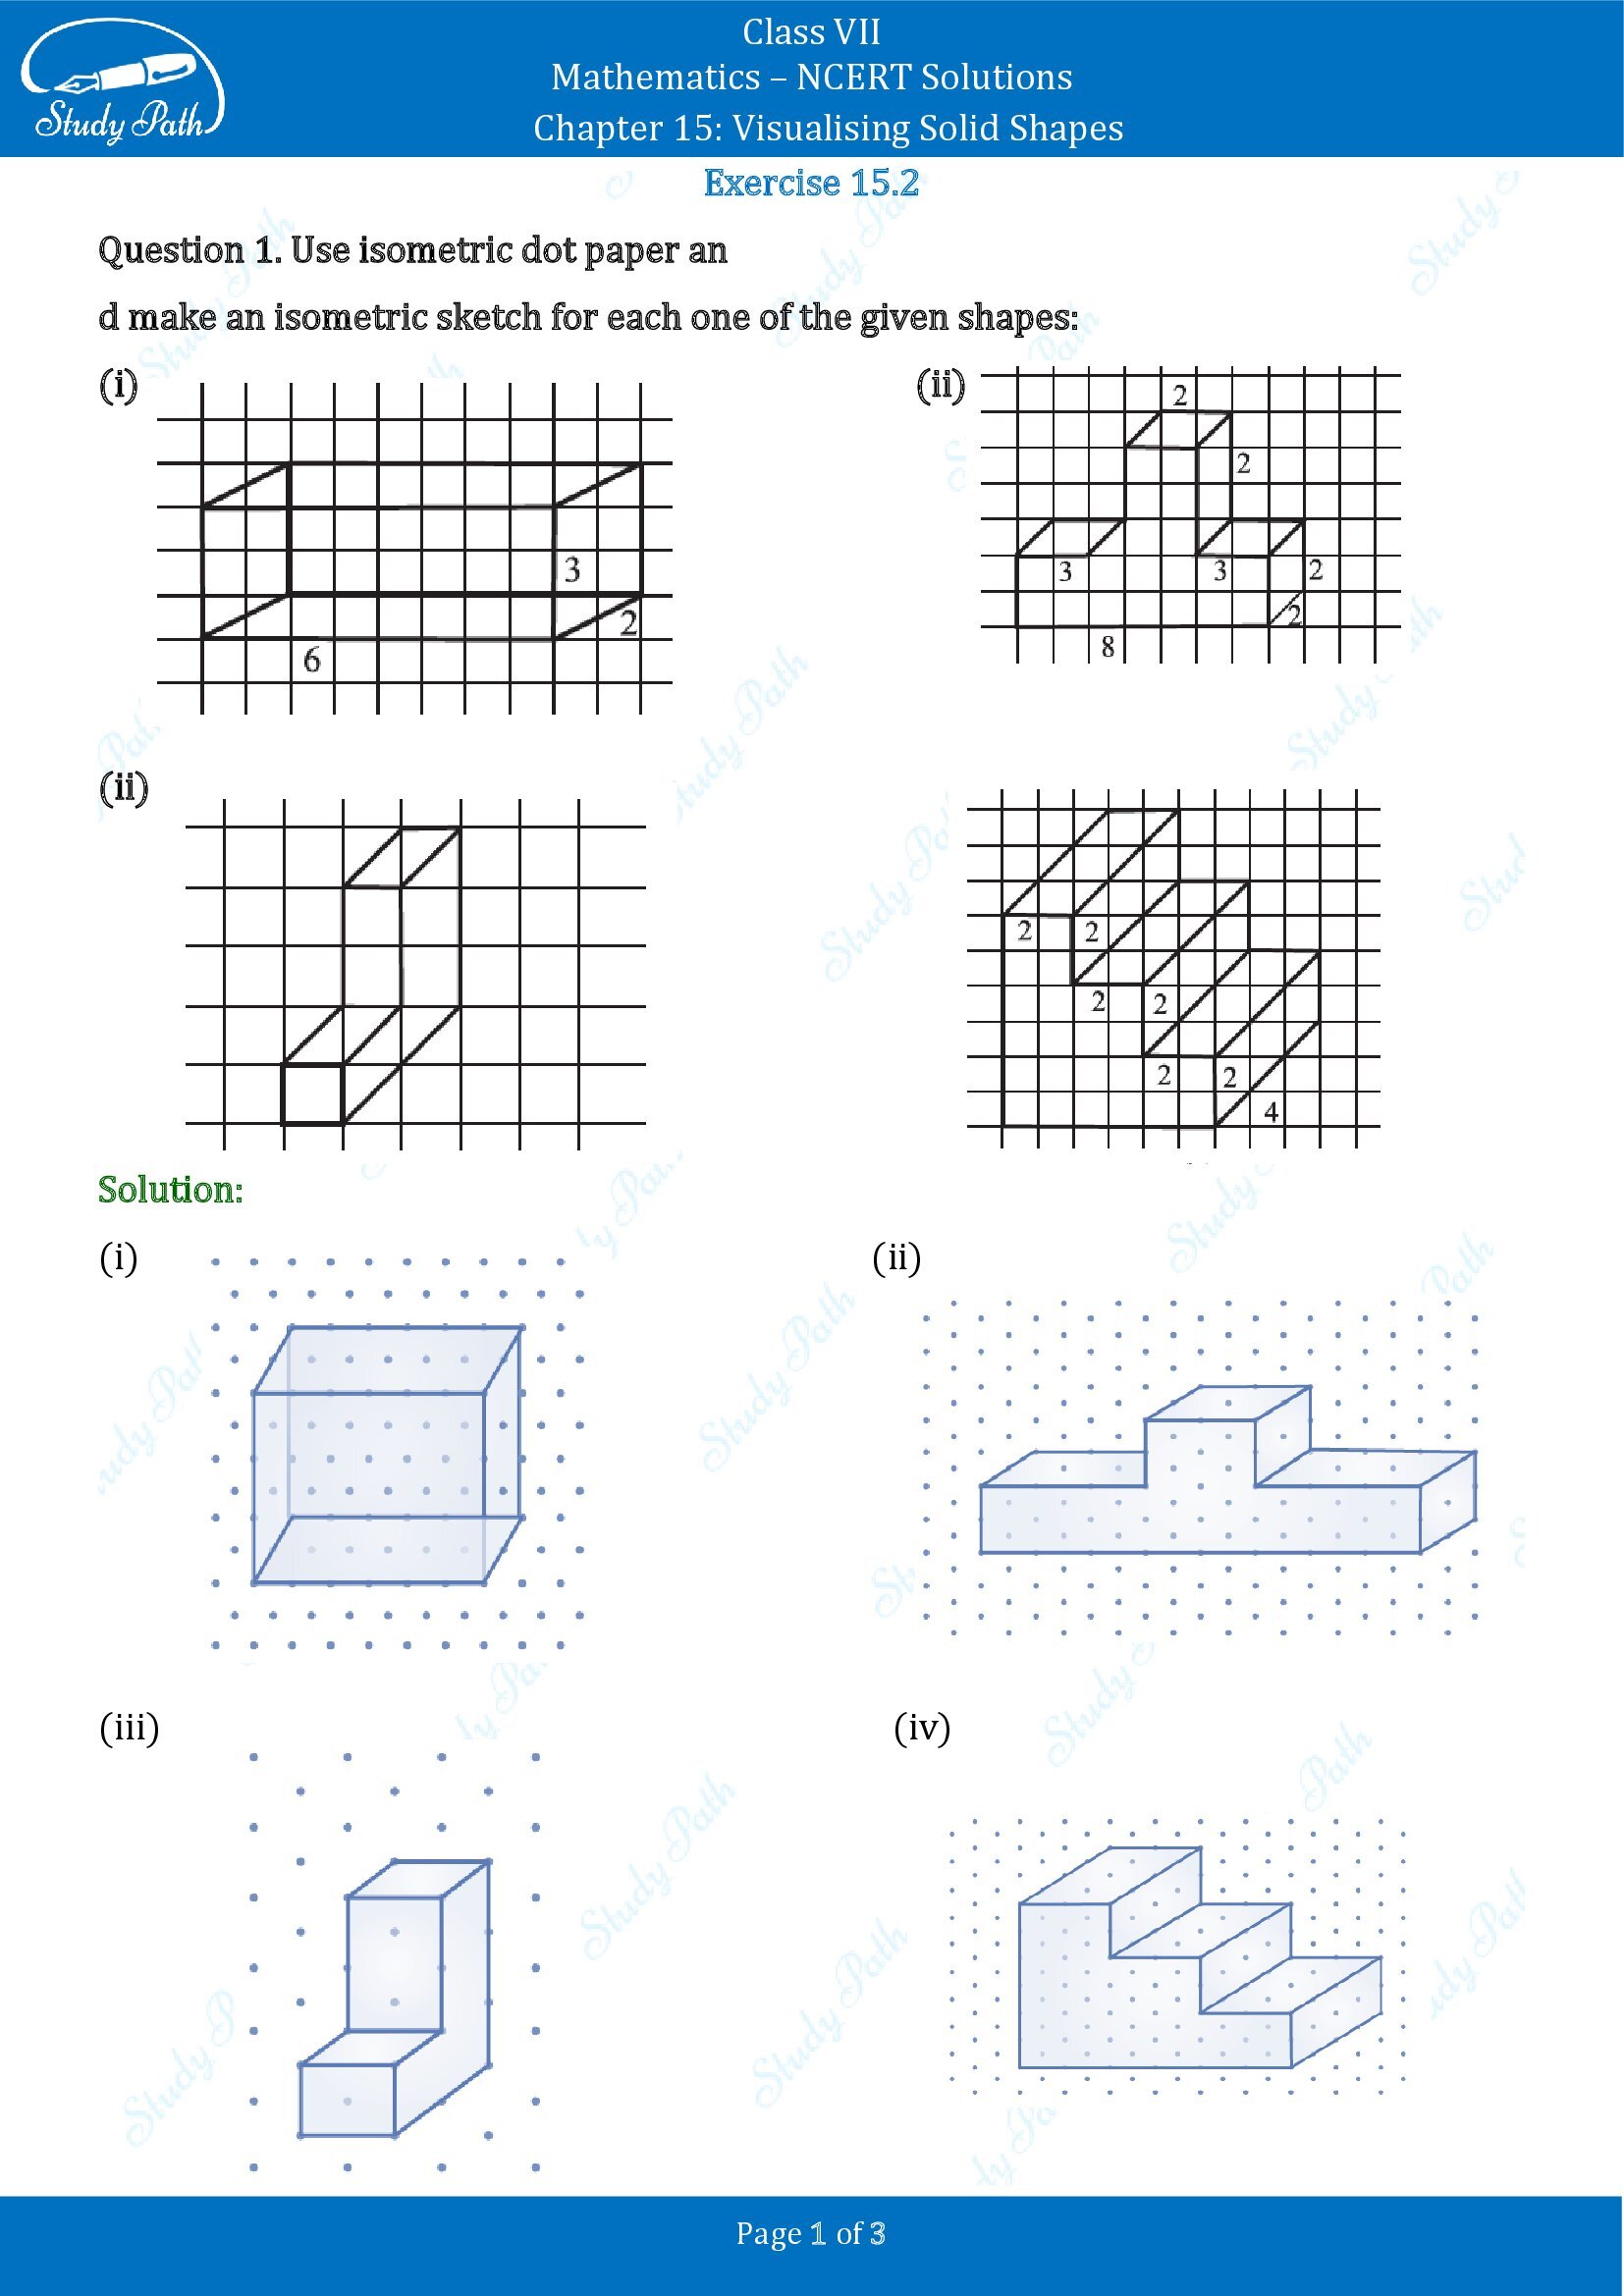 NCERT Solutions for Class 7 Maths Chapter 15 Visualising Solid Shapes Exericse 15.2 00001